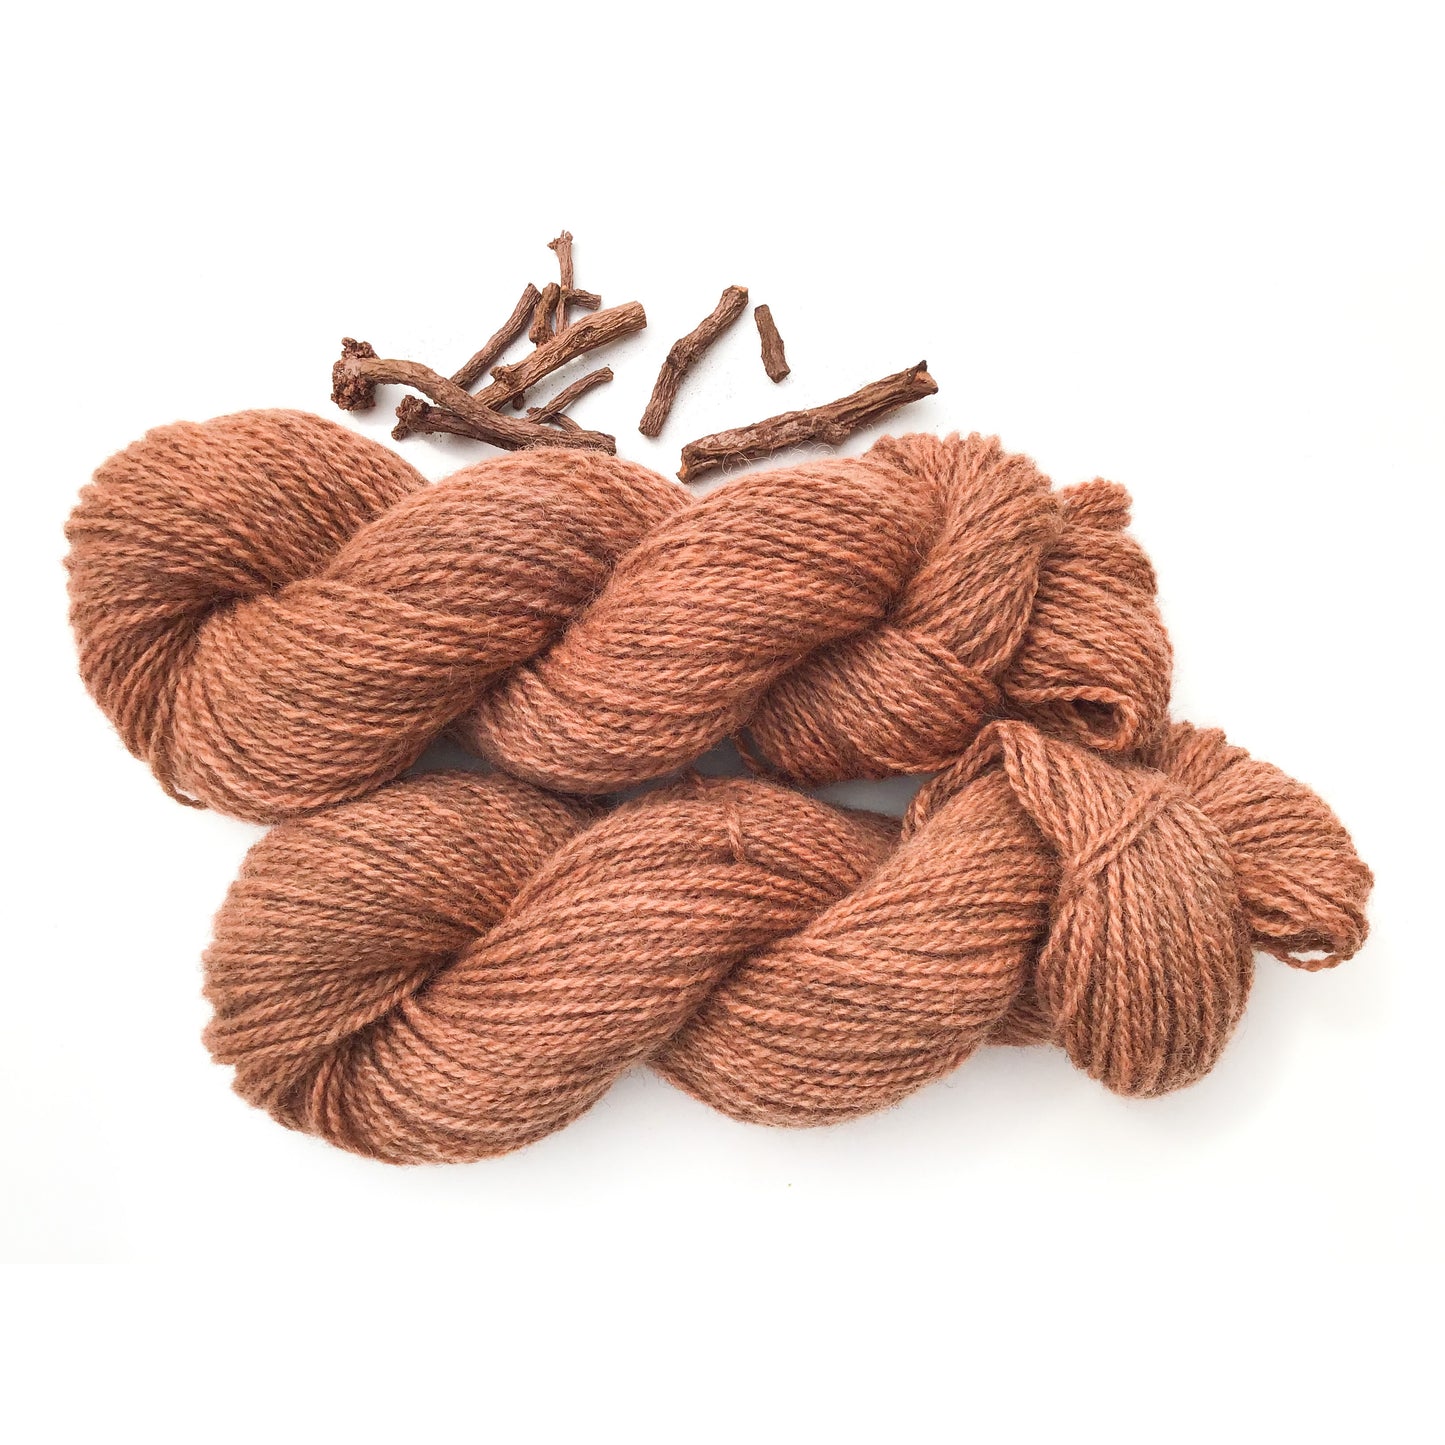 Madder Root Dyed Wool Yarn - Plant Dyed Wool Yarn 2-Ply - Worsted Weight 3.75 oz